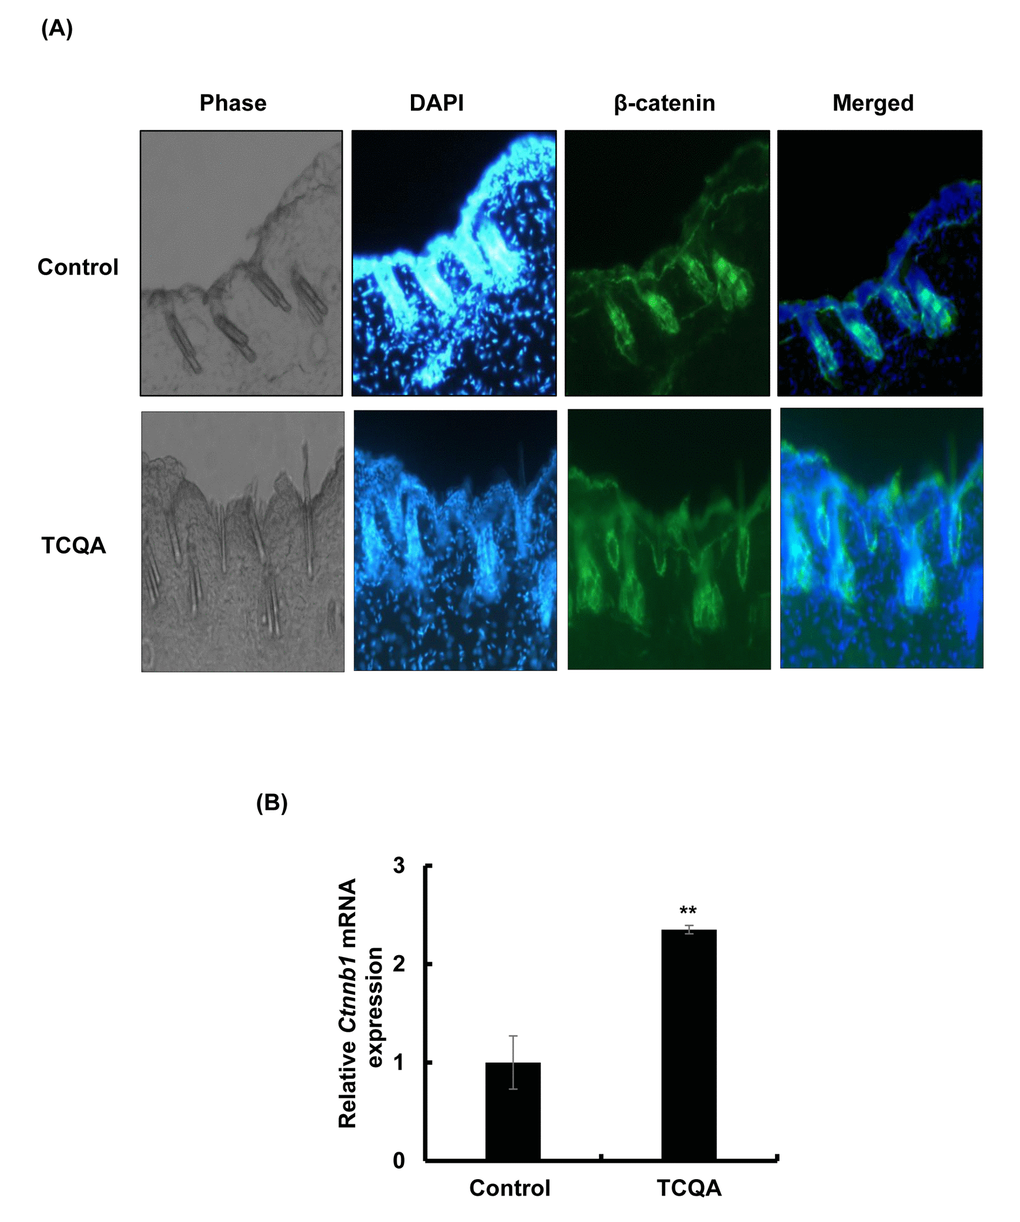 TCQA enhanced β-catenin expression in the hair follicle. (A) Immunohistochemistry was performed to measure β-catenin expression in the hair follicle and the epidermis in skin collected from the treated area from mice dorsal skin at 30 days after treatment. The figure is divided into four panels, the first panel is the phase, the second is DAPI to stain the nucleus, the third is for β-catenin staining, and the last panel is a merge between β-catenin and the nucleus. (B) Ctnnb1 mRNA relative expression was measured after treatment with TCQA at 30 days after treatment. The mRNA level was quantified using TaqMan real-time PCR from RNA extracted from the treated area (TCQA or milli-Q water) from the mice dorsal back. 